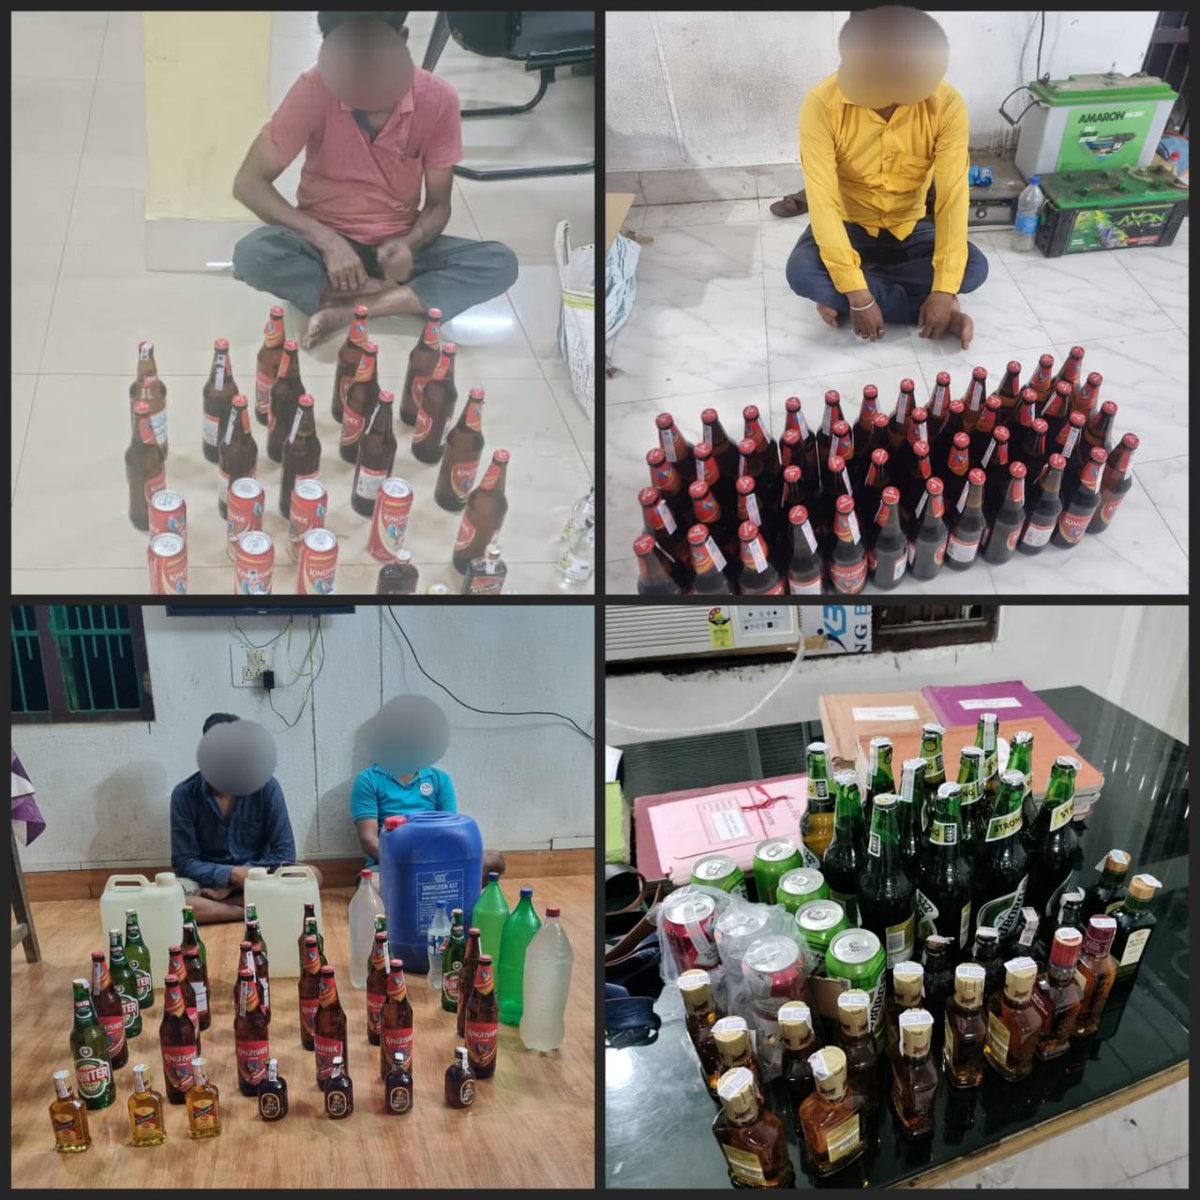 In separate Excise raids, Balasore Police has seized more than 78 ltr FL, 60 ltr ID liquor, arrested 5 persons & registered 5 separate cases (Soro PS-2, Oupada PS-2 & Khaira PS-1). Balasore Police will continue the drive against illegal liquor.